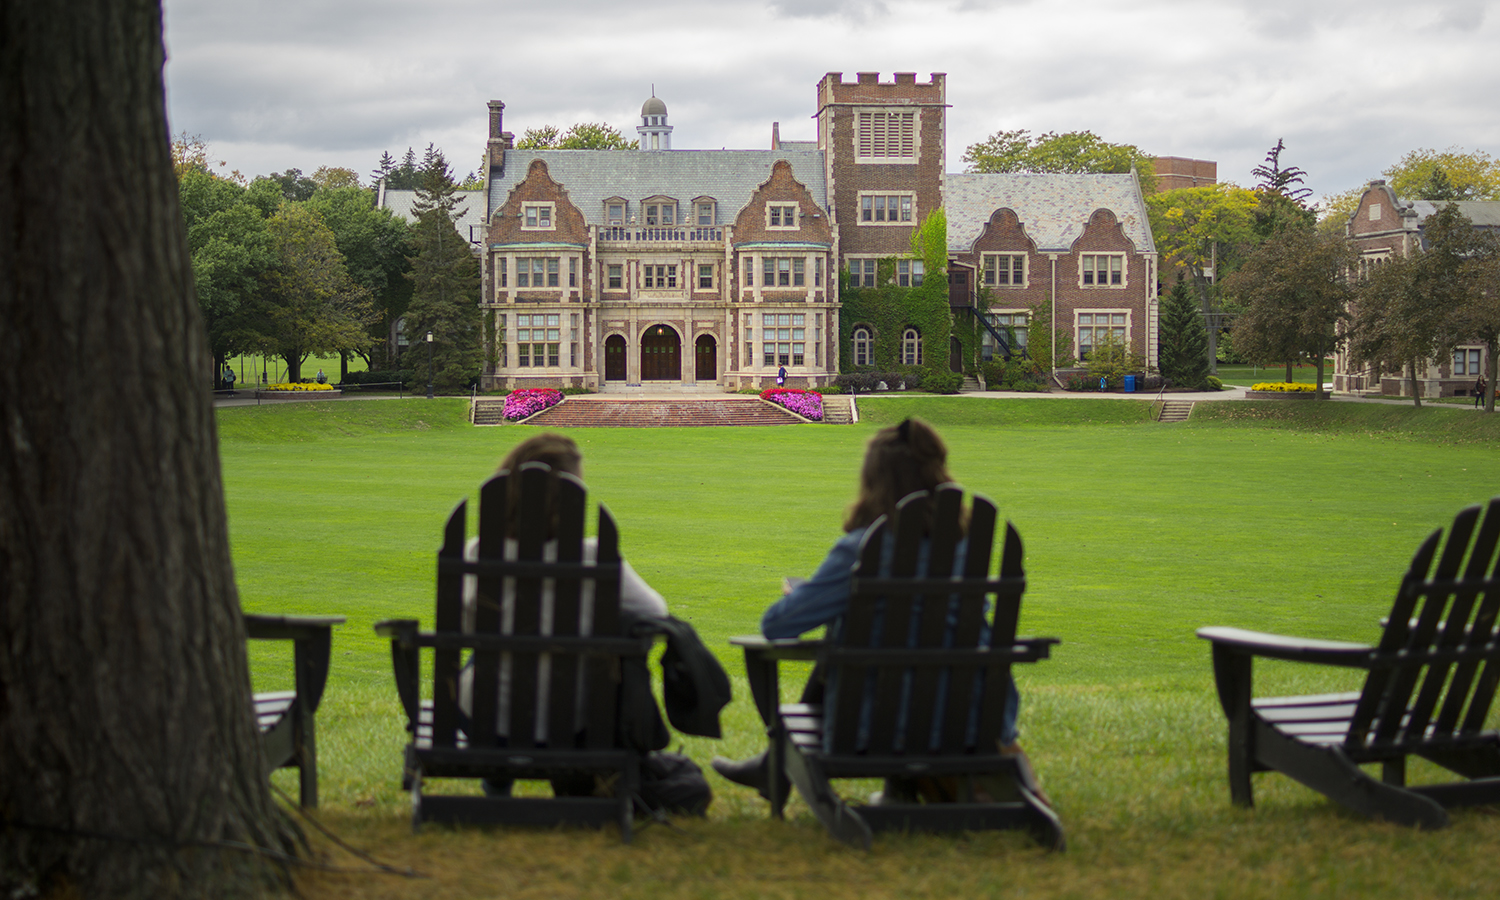 Students sit in Adirondack chairs, overlooking the Quad